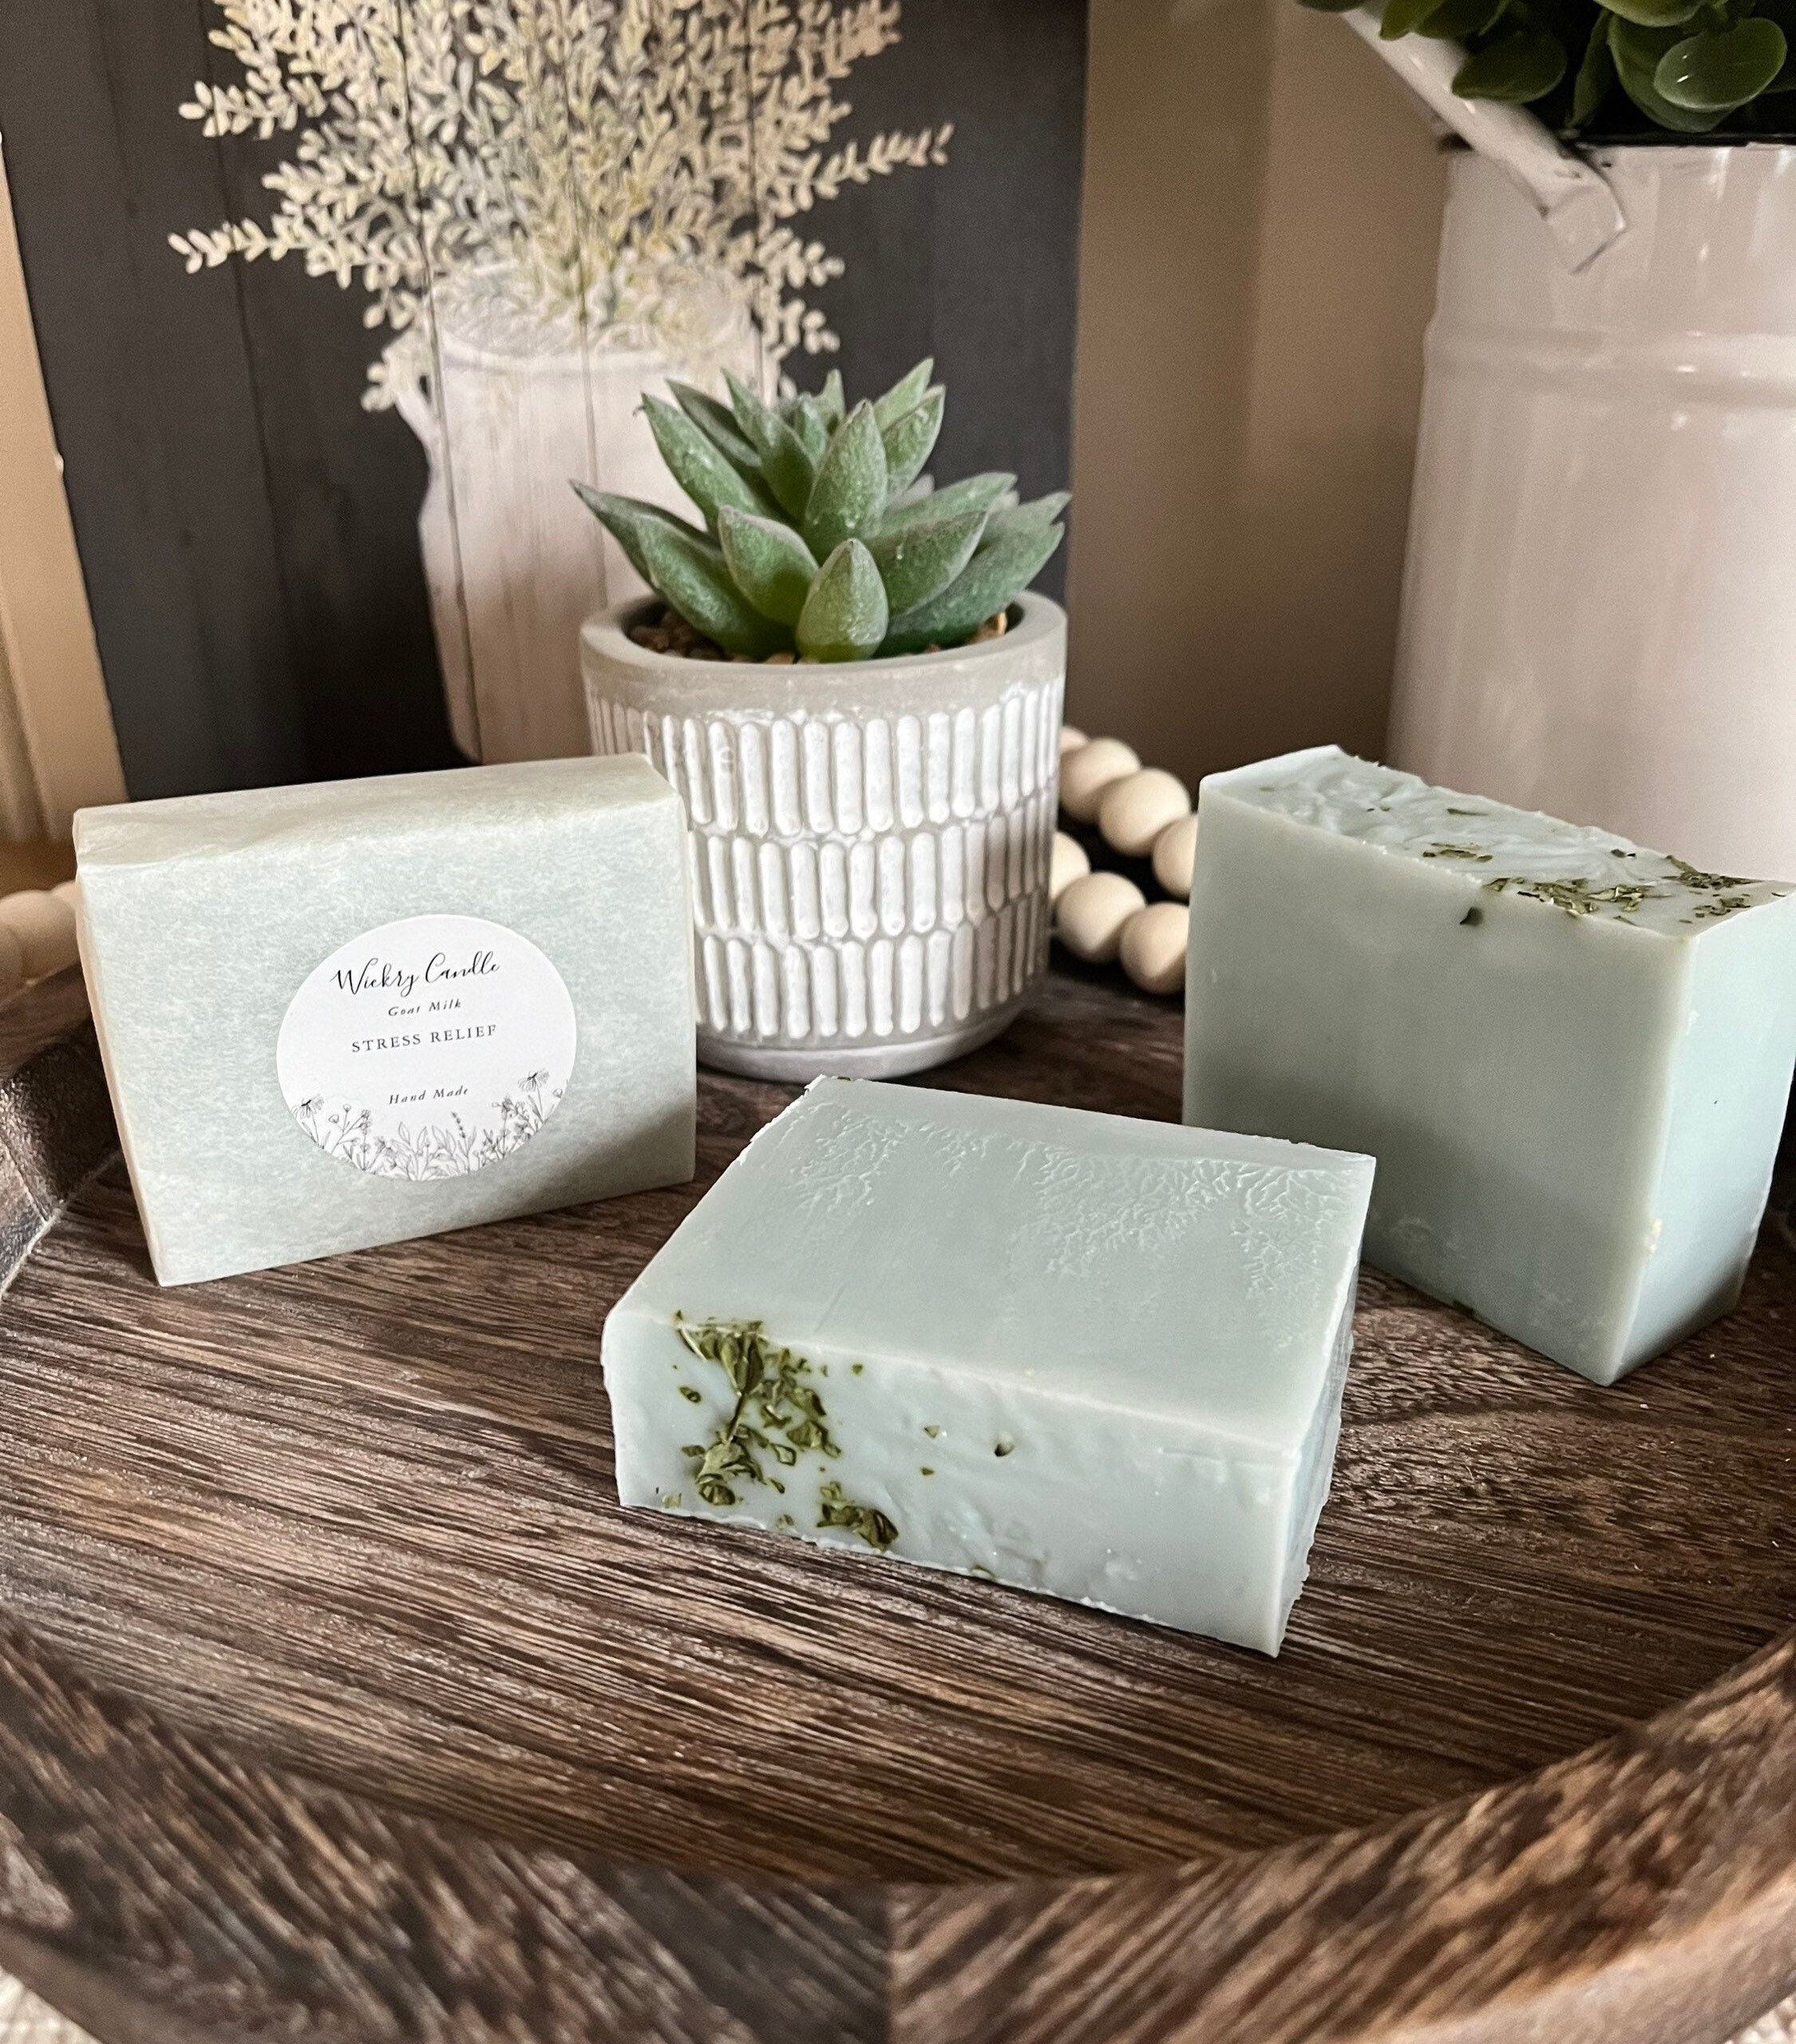 Herb & Scent Soap Stamp: Mint, Sage, Rosemary, Patchouli, Cotton, Hemp,  Lemongrass, Honey Almond, Coffee for Soap Making. Includes Handle. 